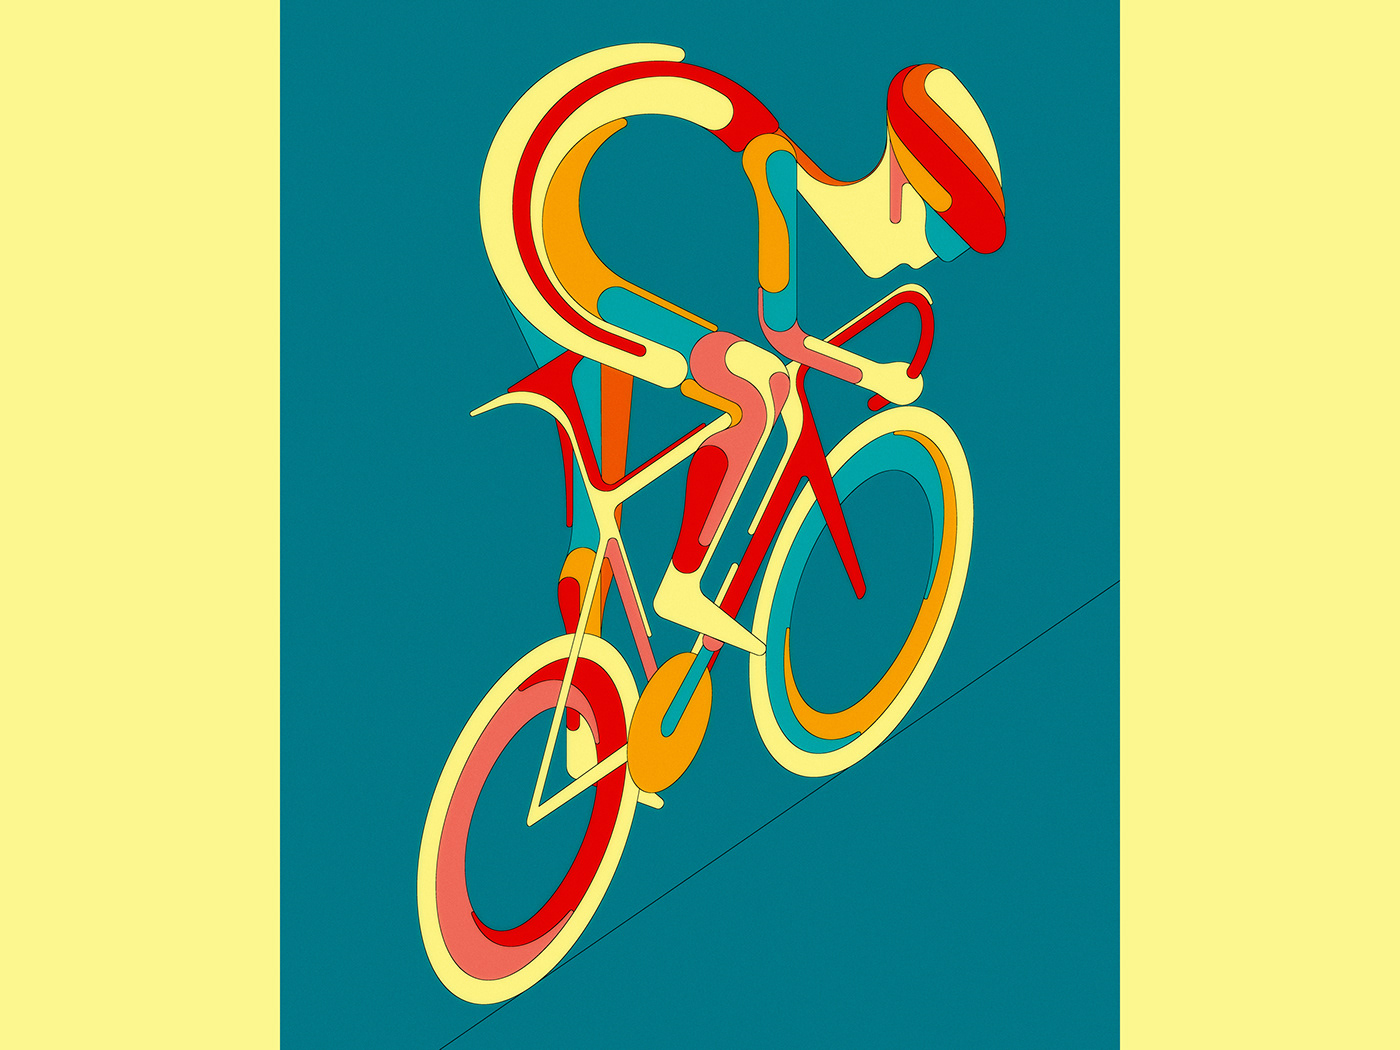 Illustration of Bike charles williams cycle Cycling cycling posters geometric made up sport Tour de France velo